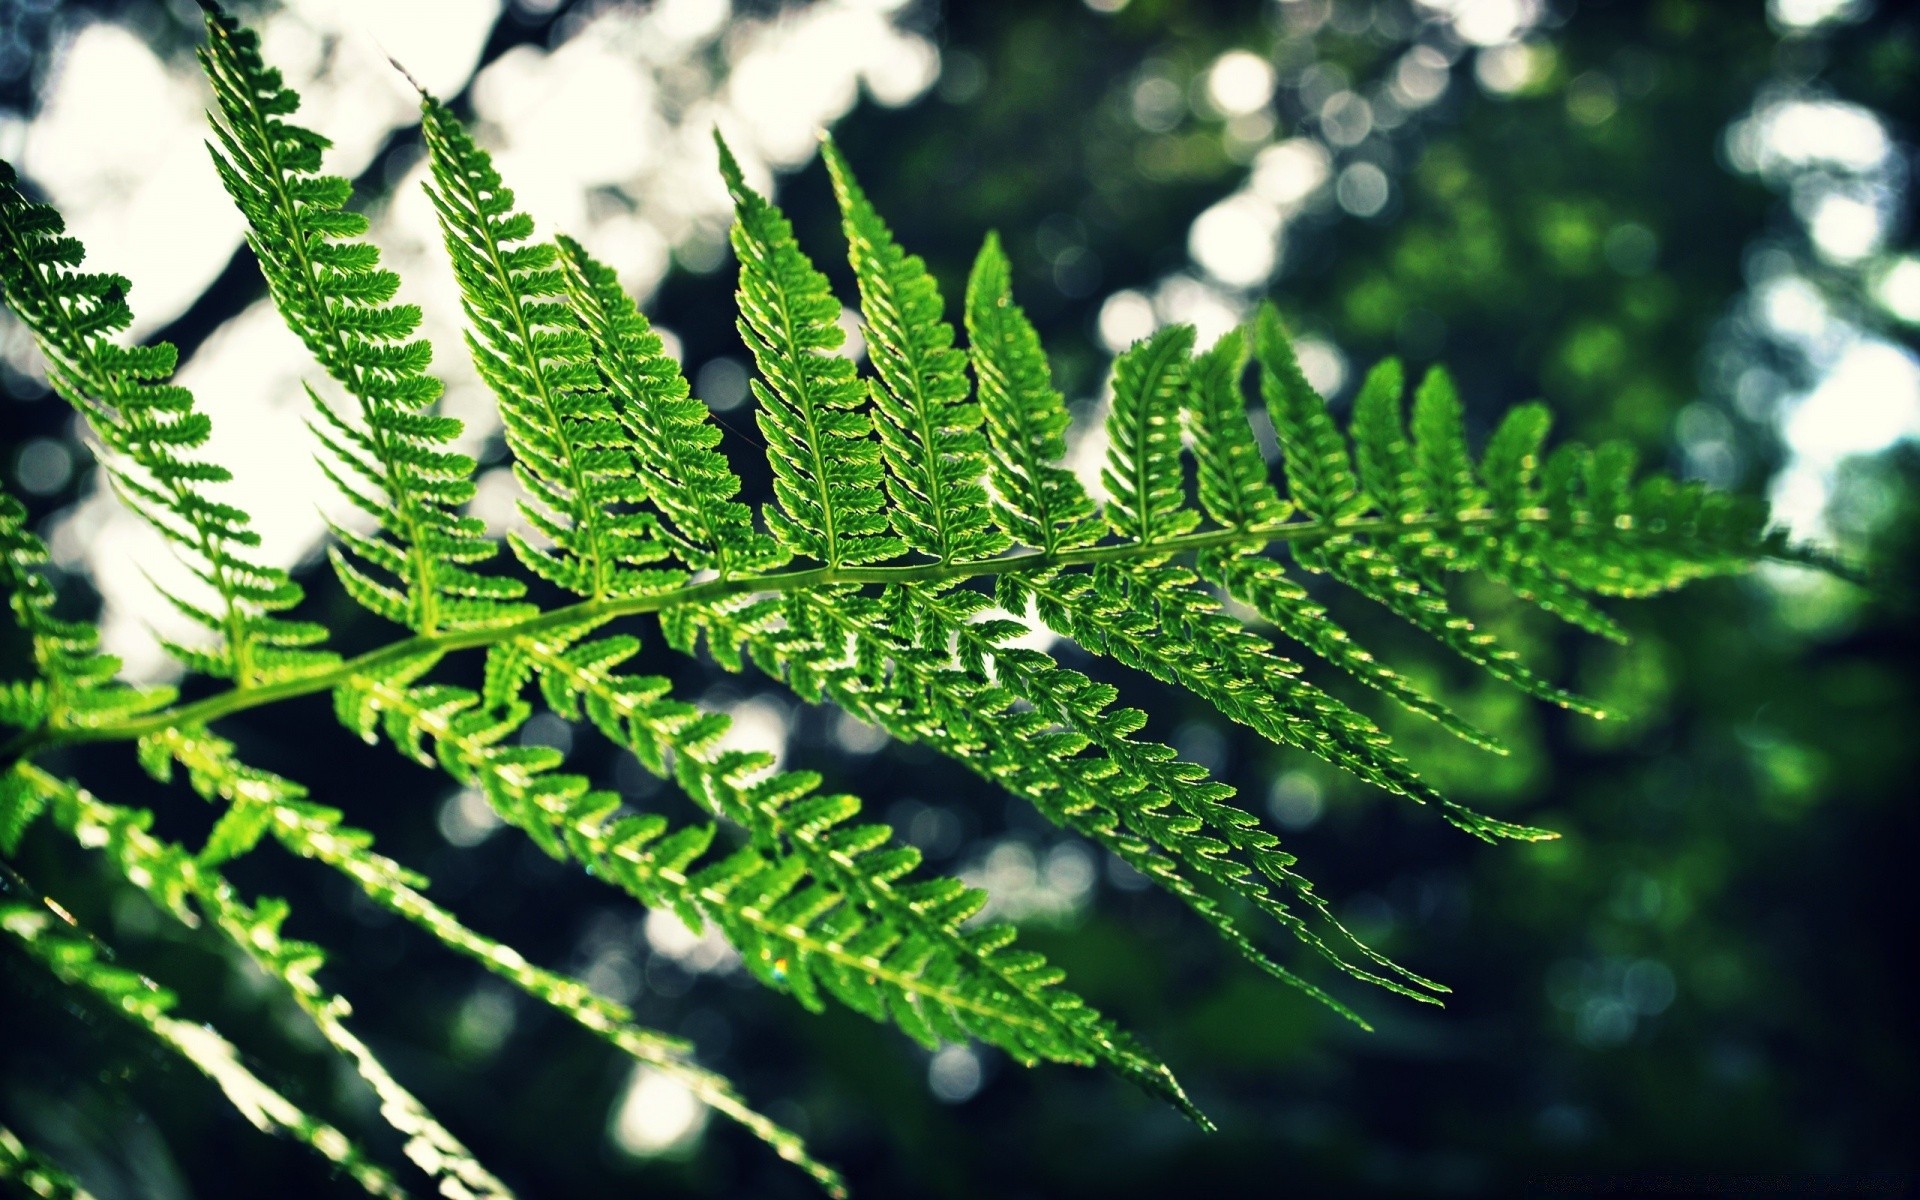 plants flora leaf nature fern environment outdoors tree desktop growth summer garden close-up lush frond color freshness ecology pattern wood